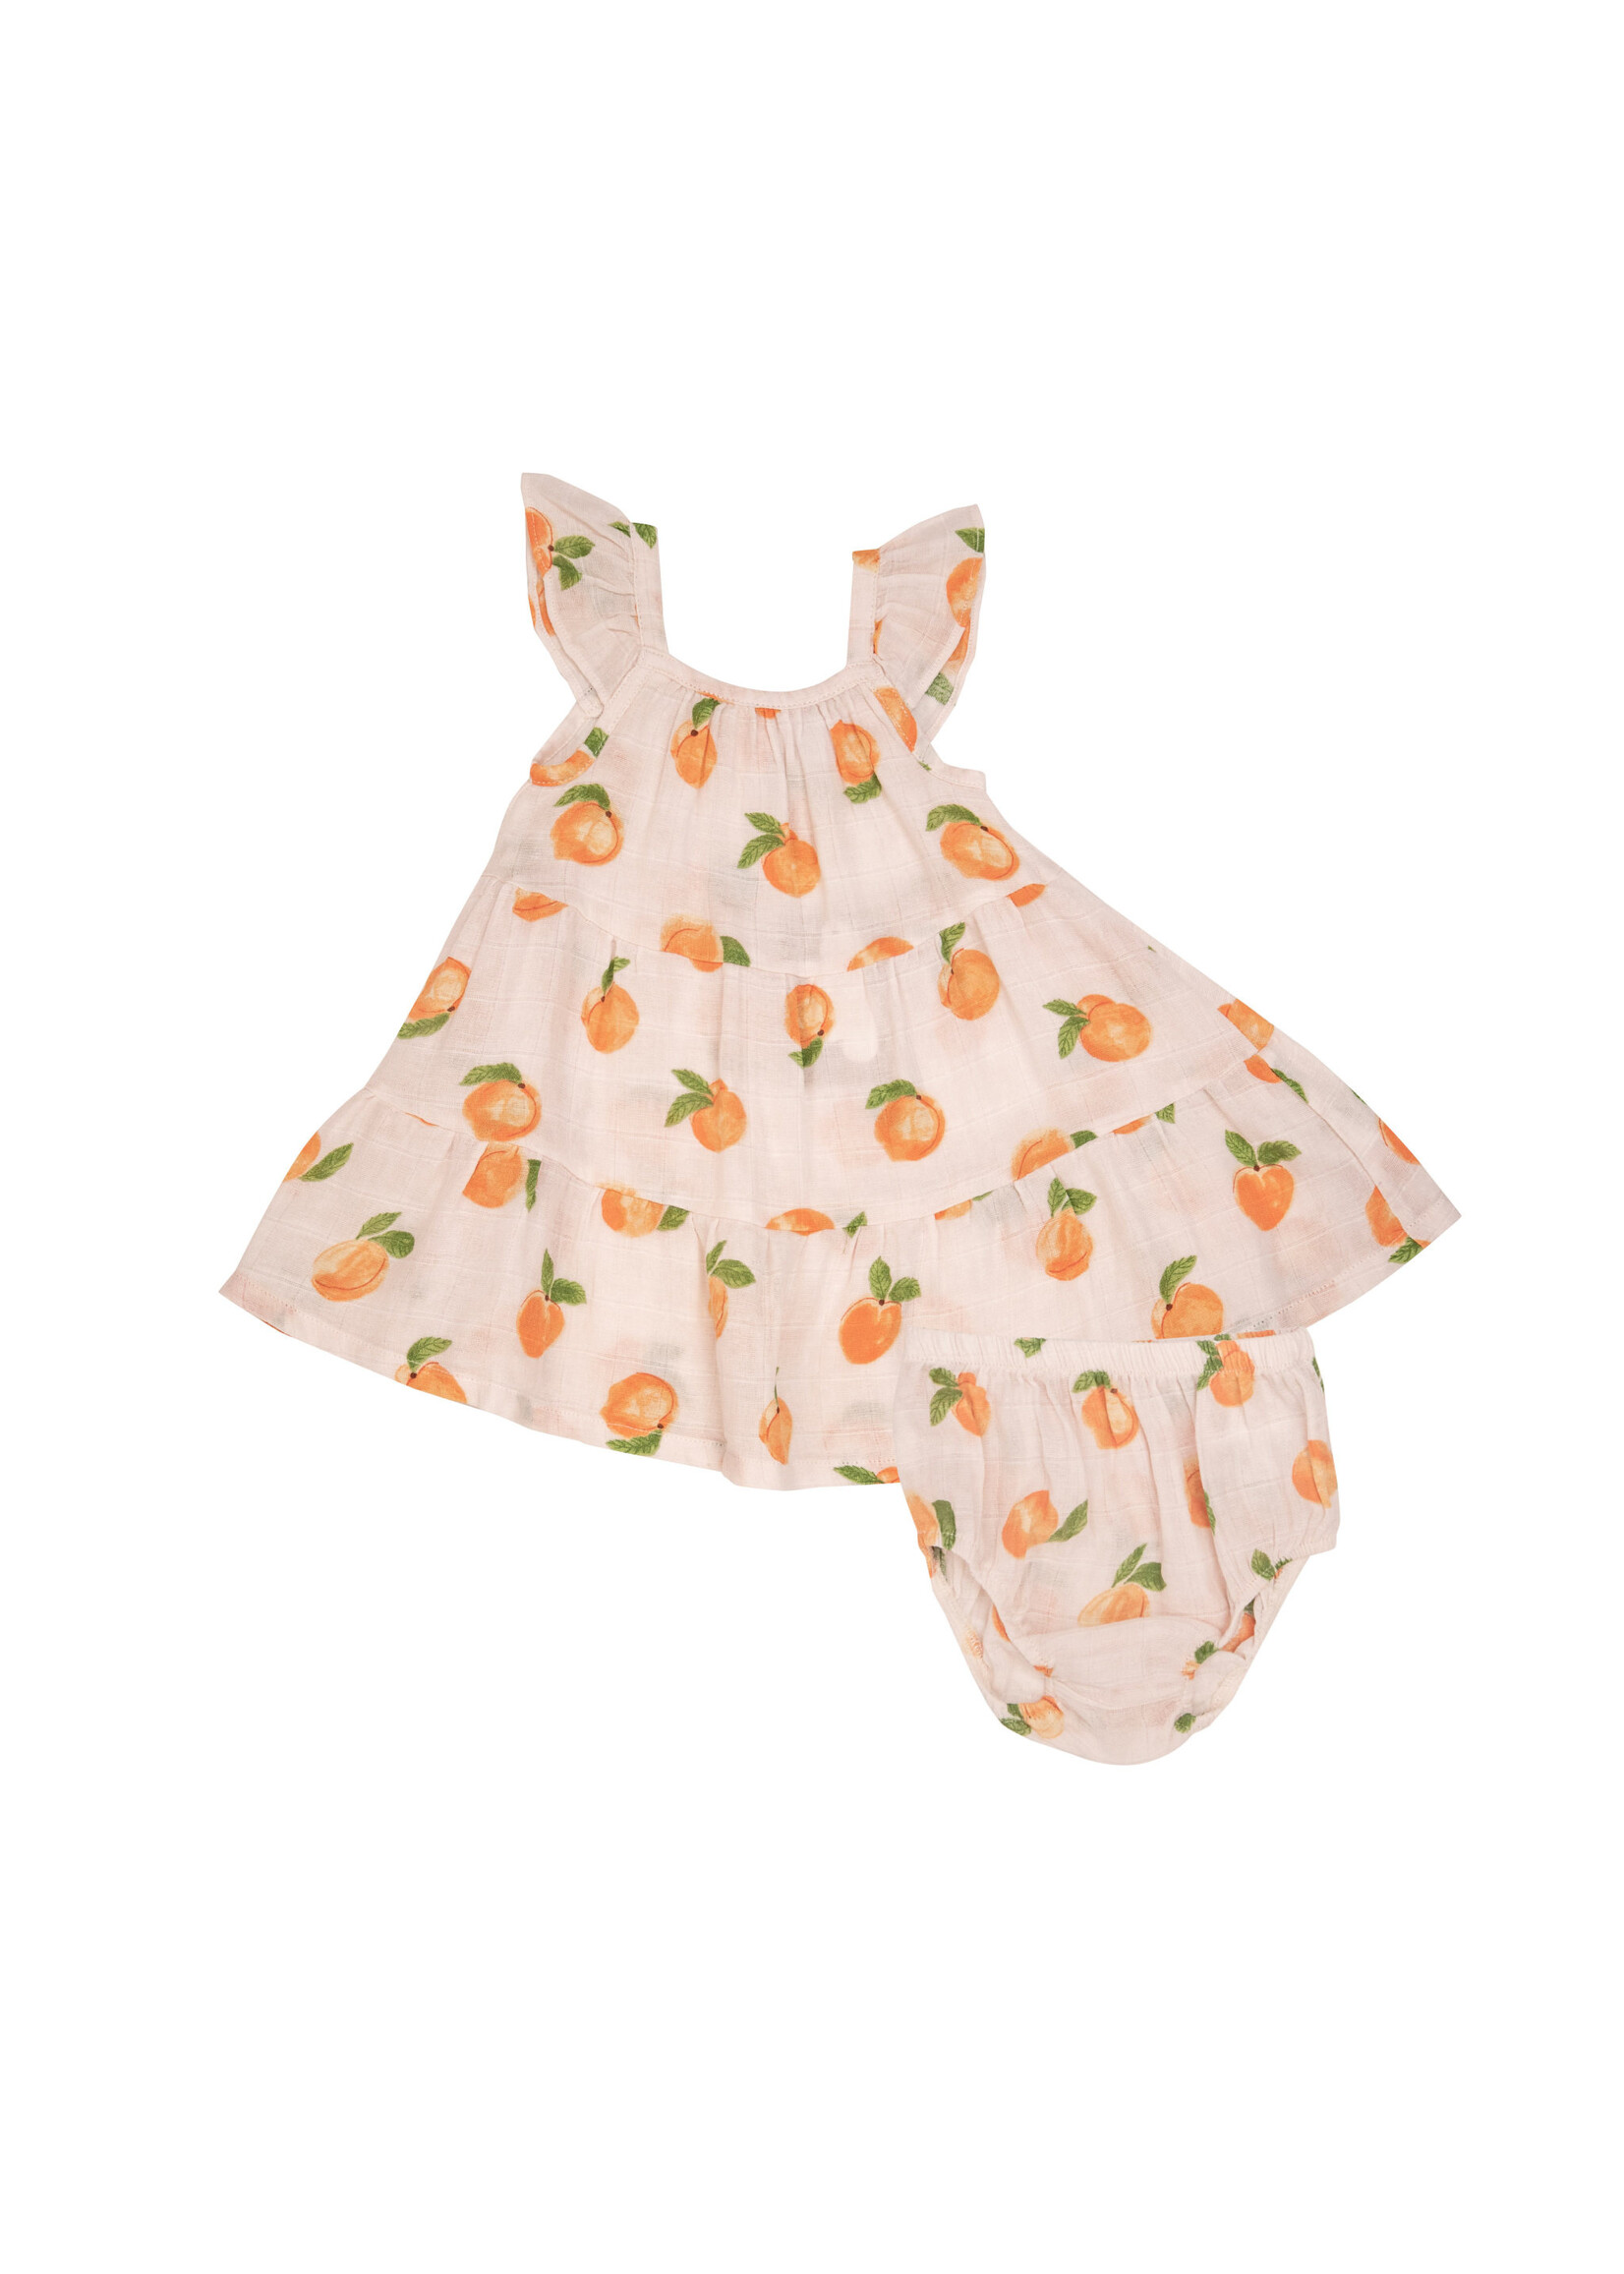 Angel Dear Peaches Twirly Sundress and Diaper Cover